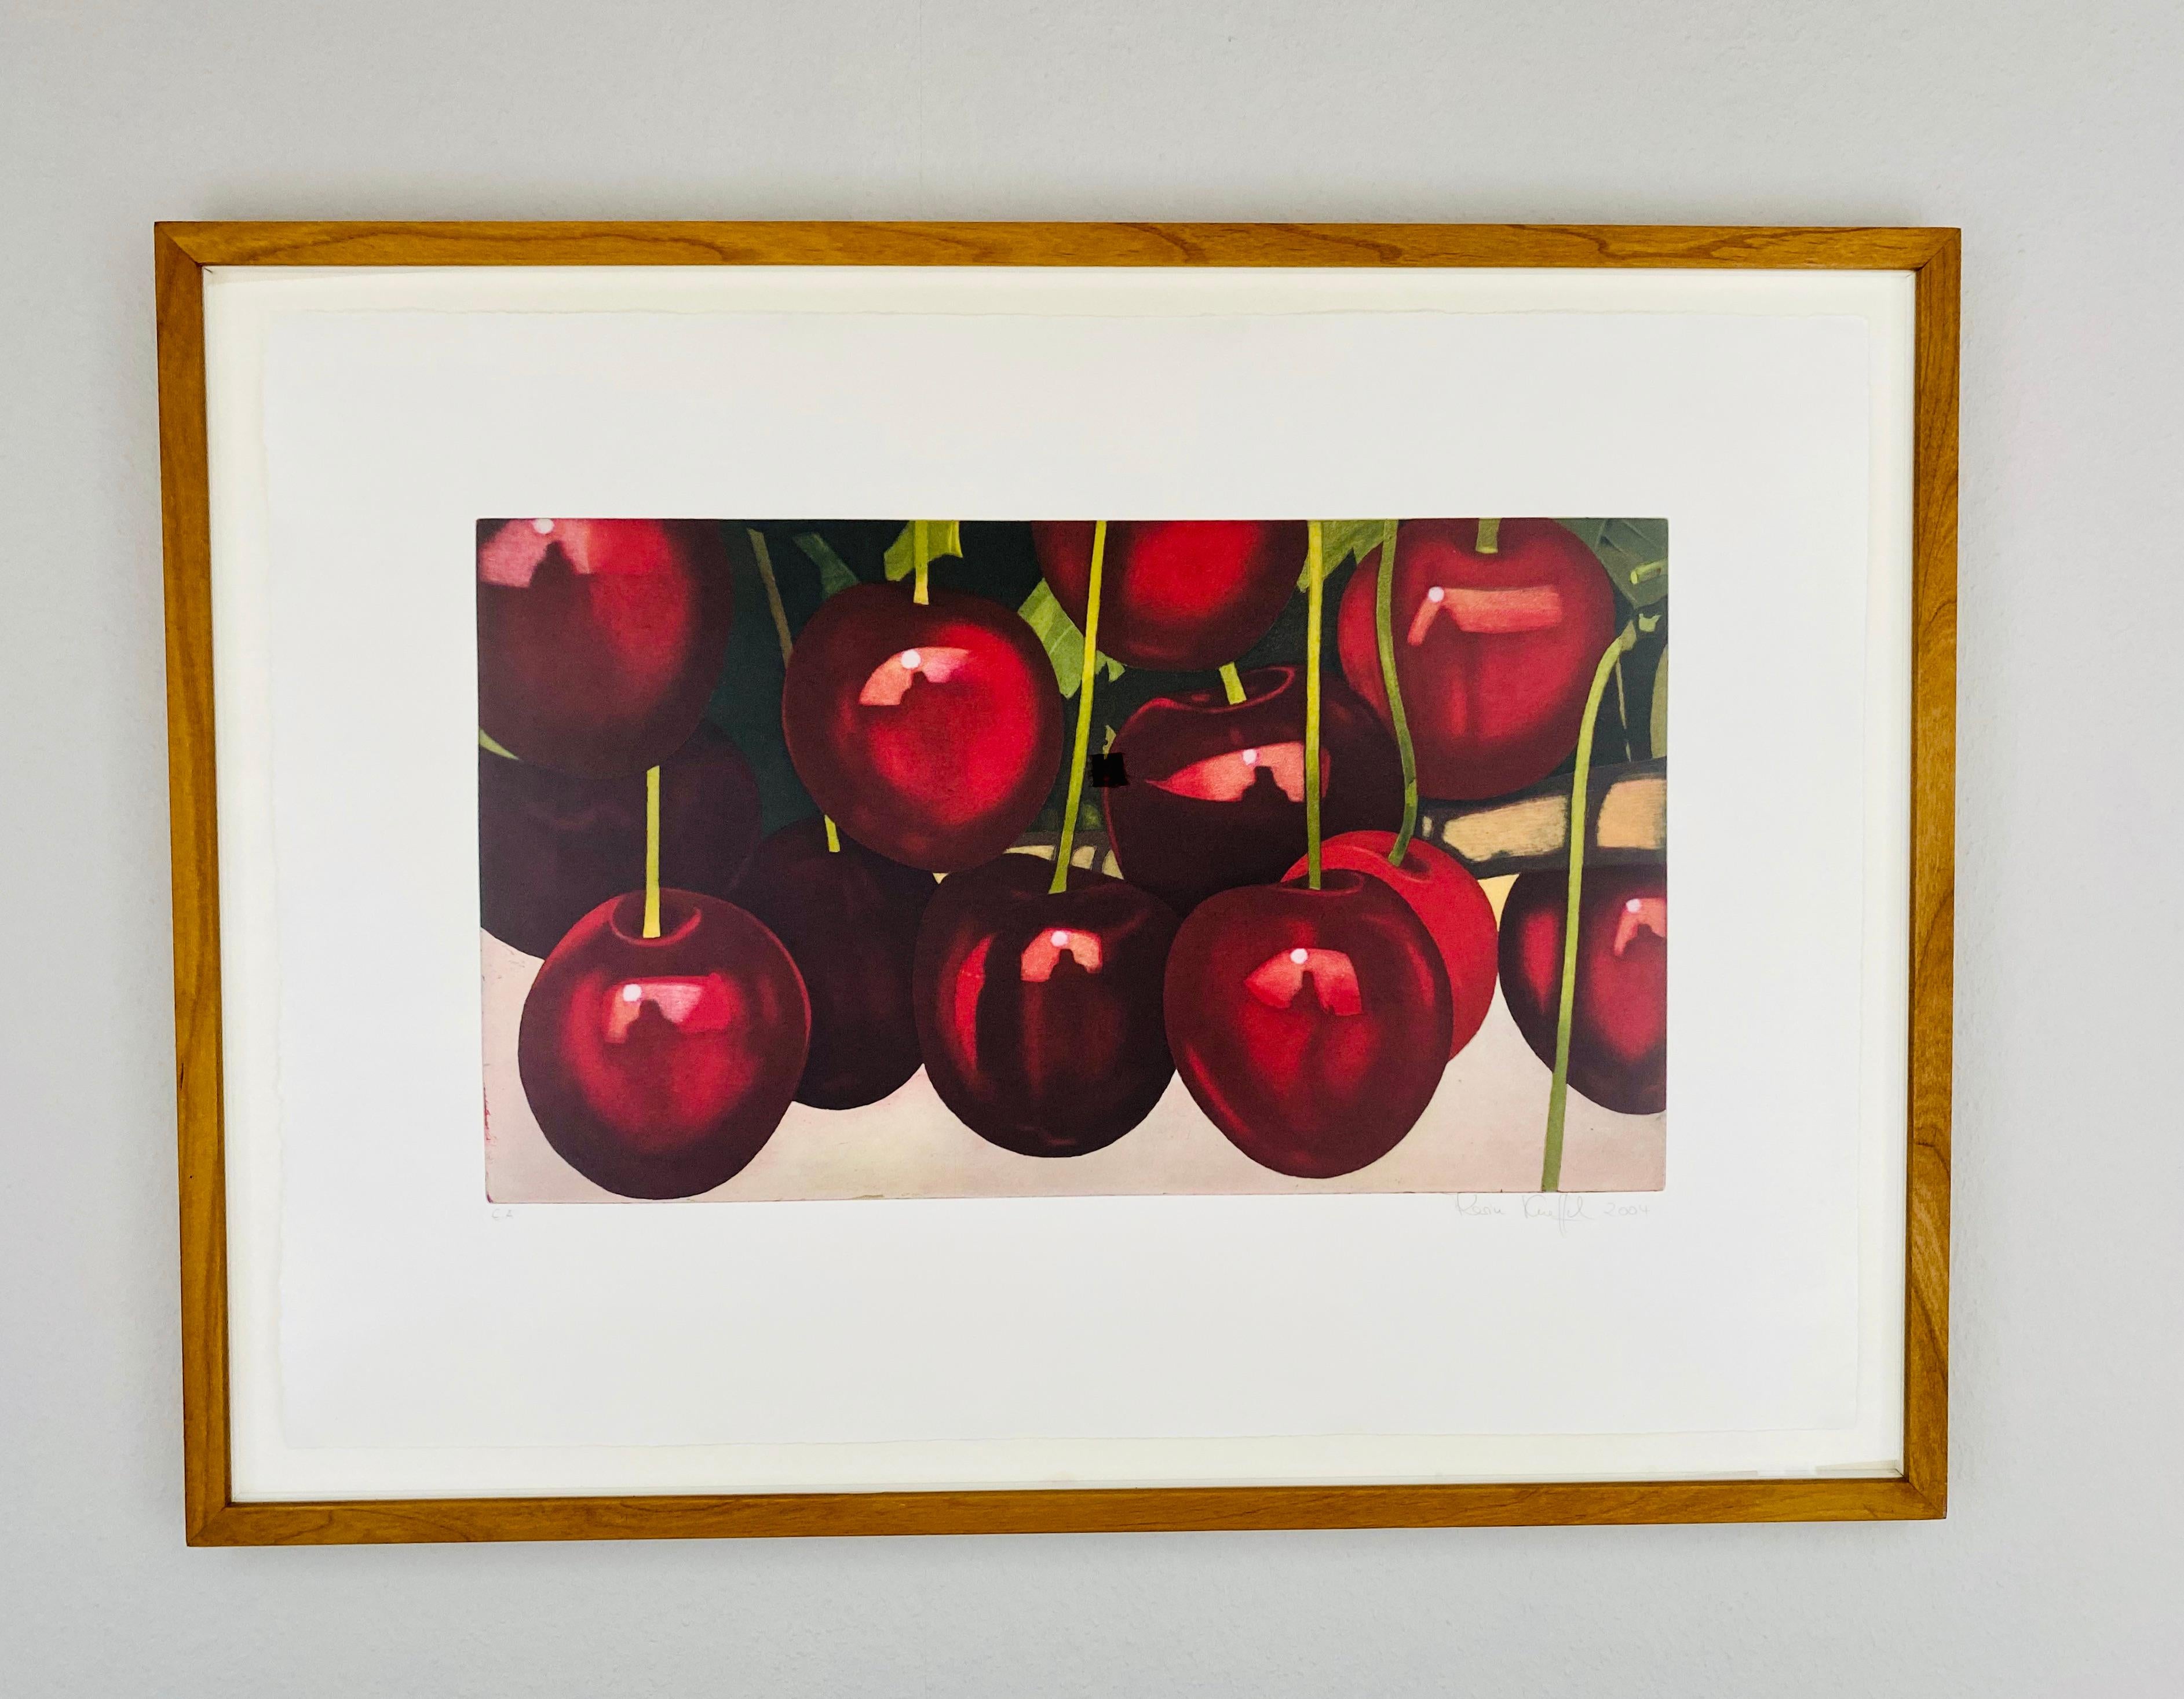 untitled, cherries, 2004 etching on hand-made paper, photorealistic - Print by Karin Kneffel